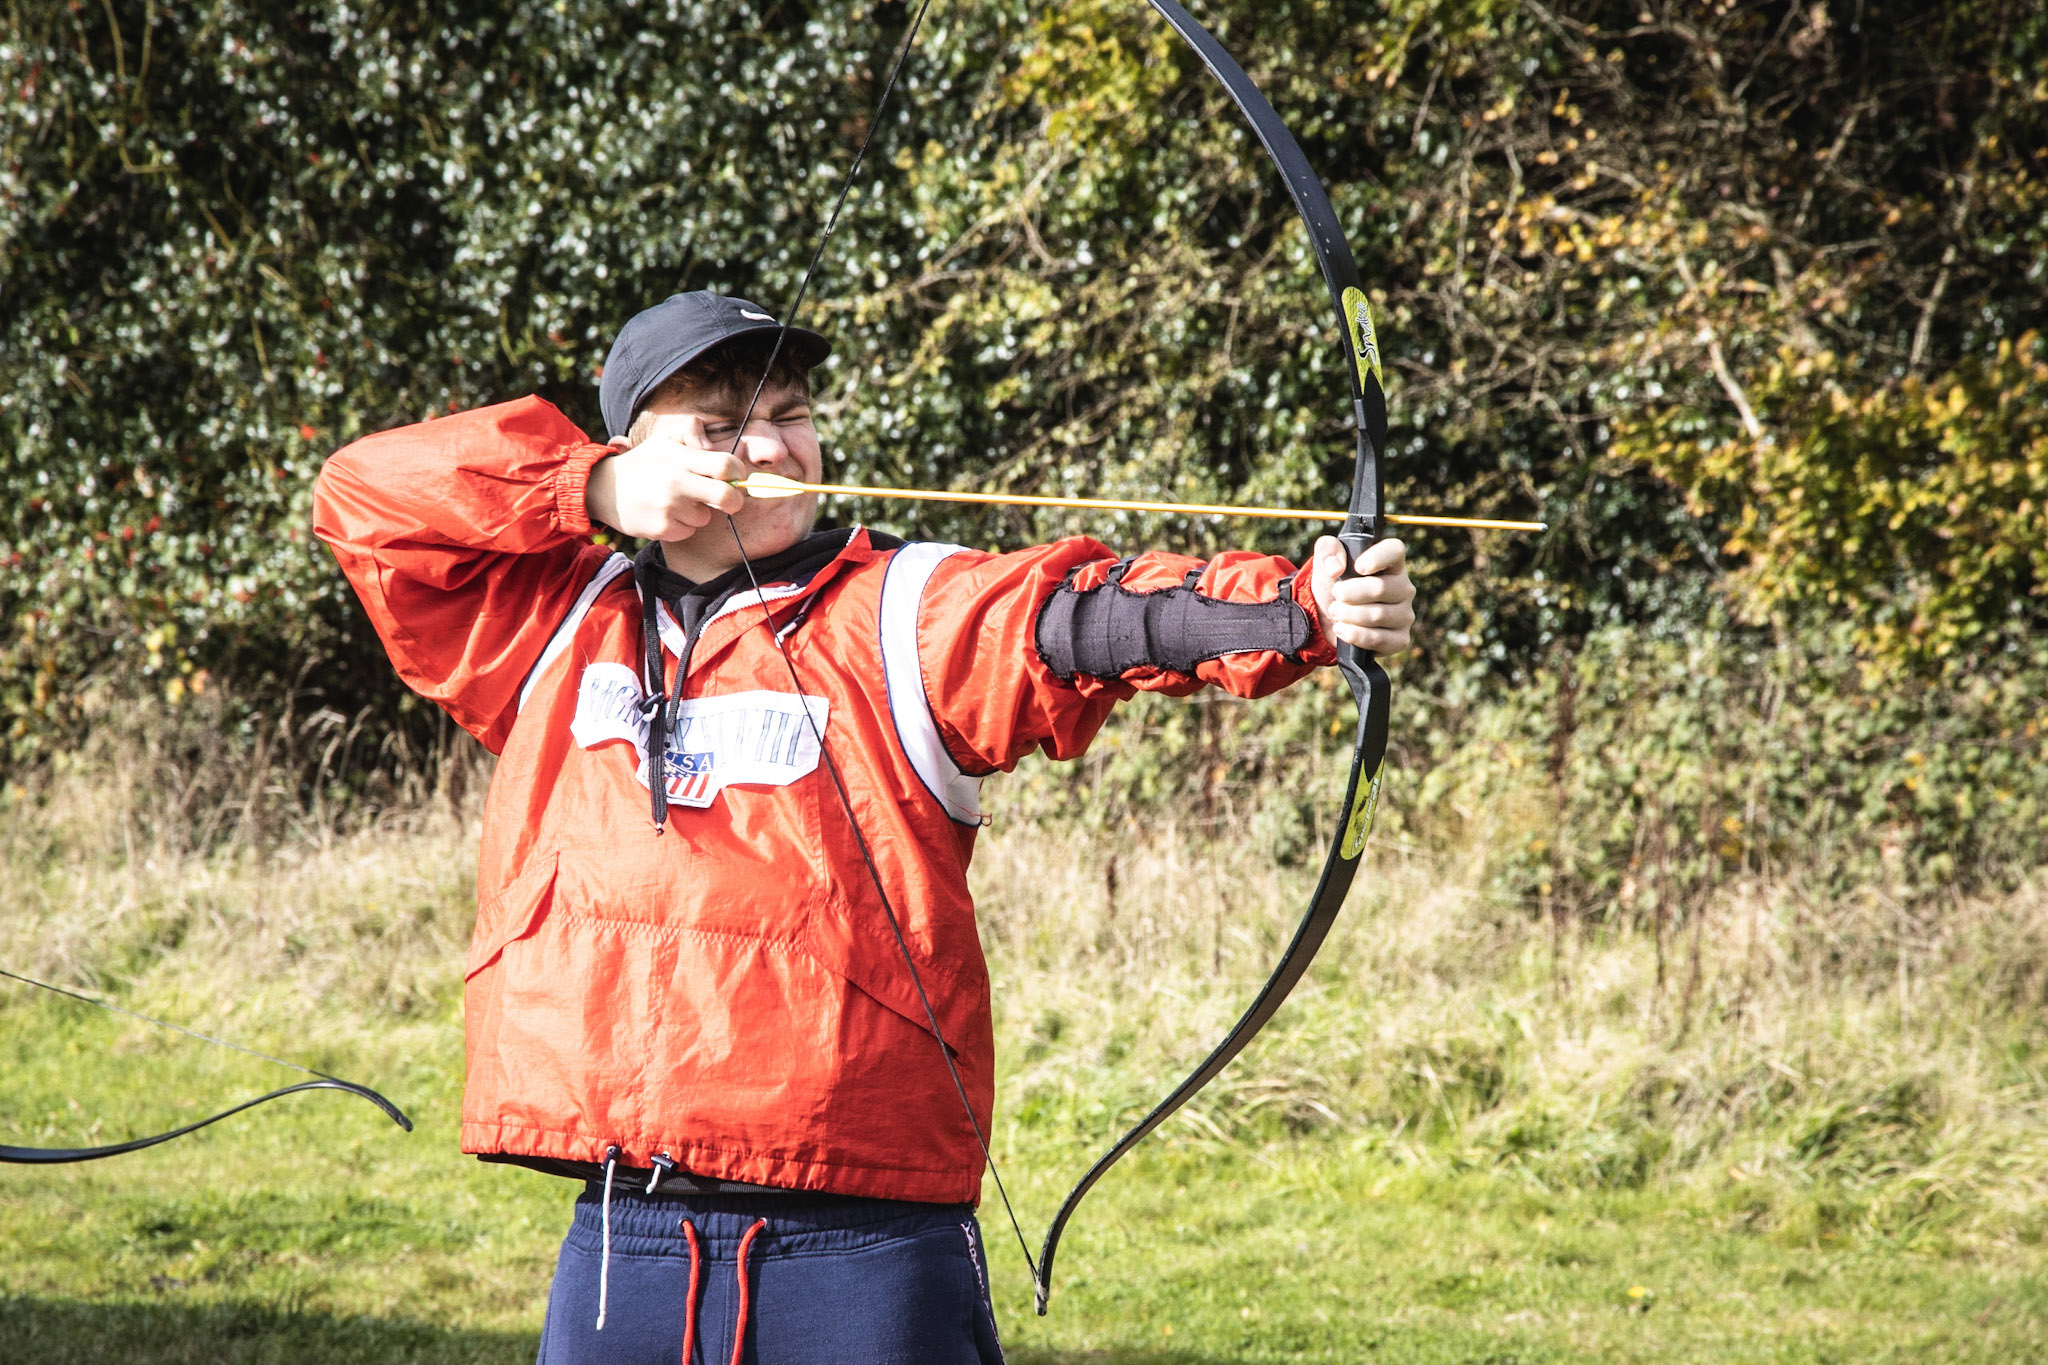 A man taking part in a guided archery session